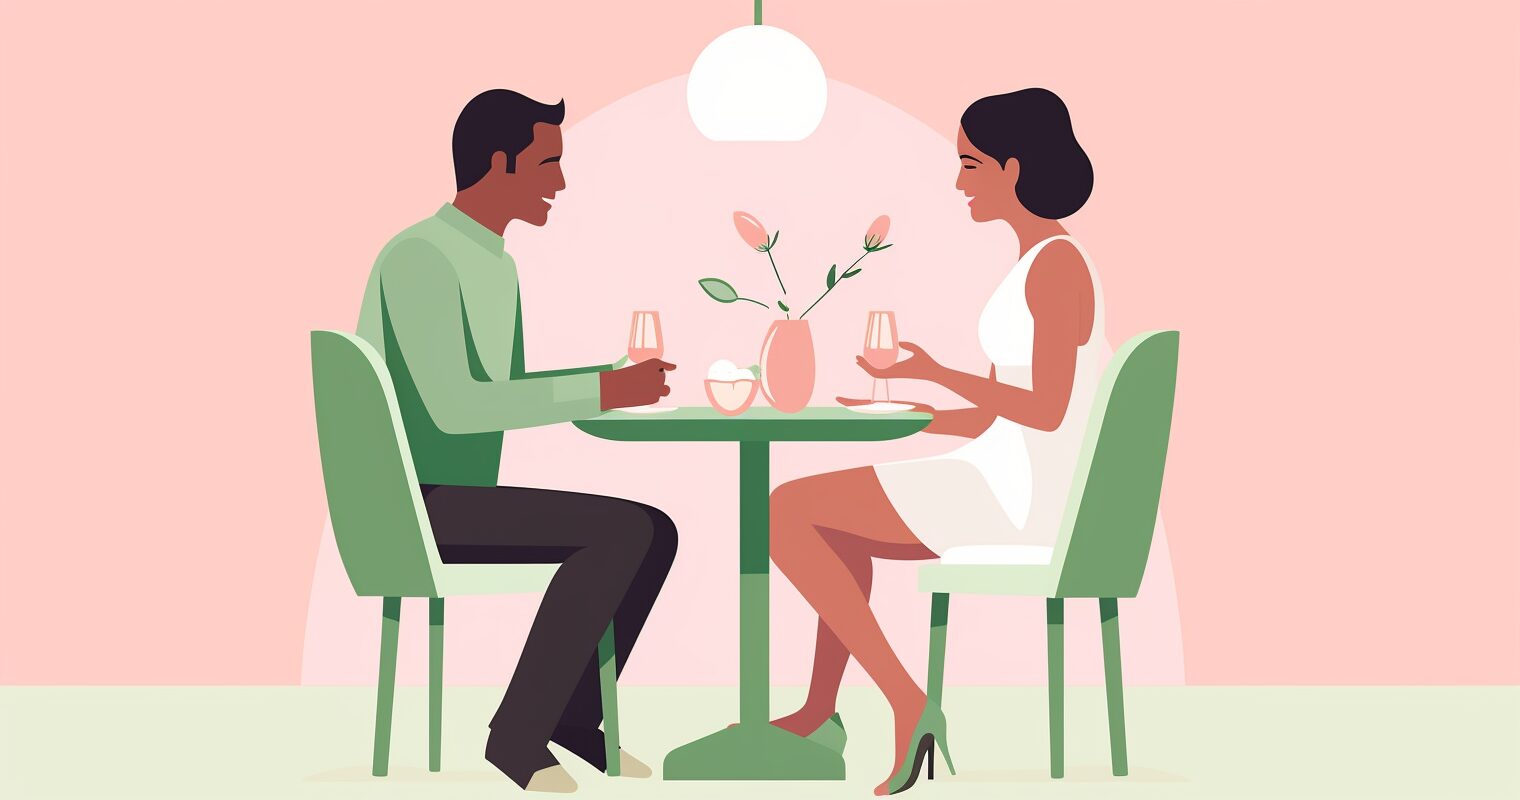 A man and a woman sitting at a table talking and drinking wine.